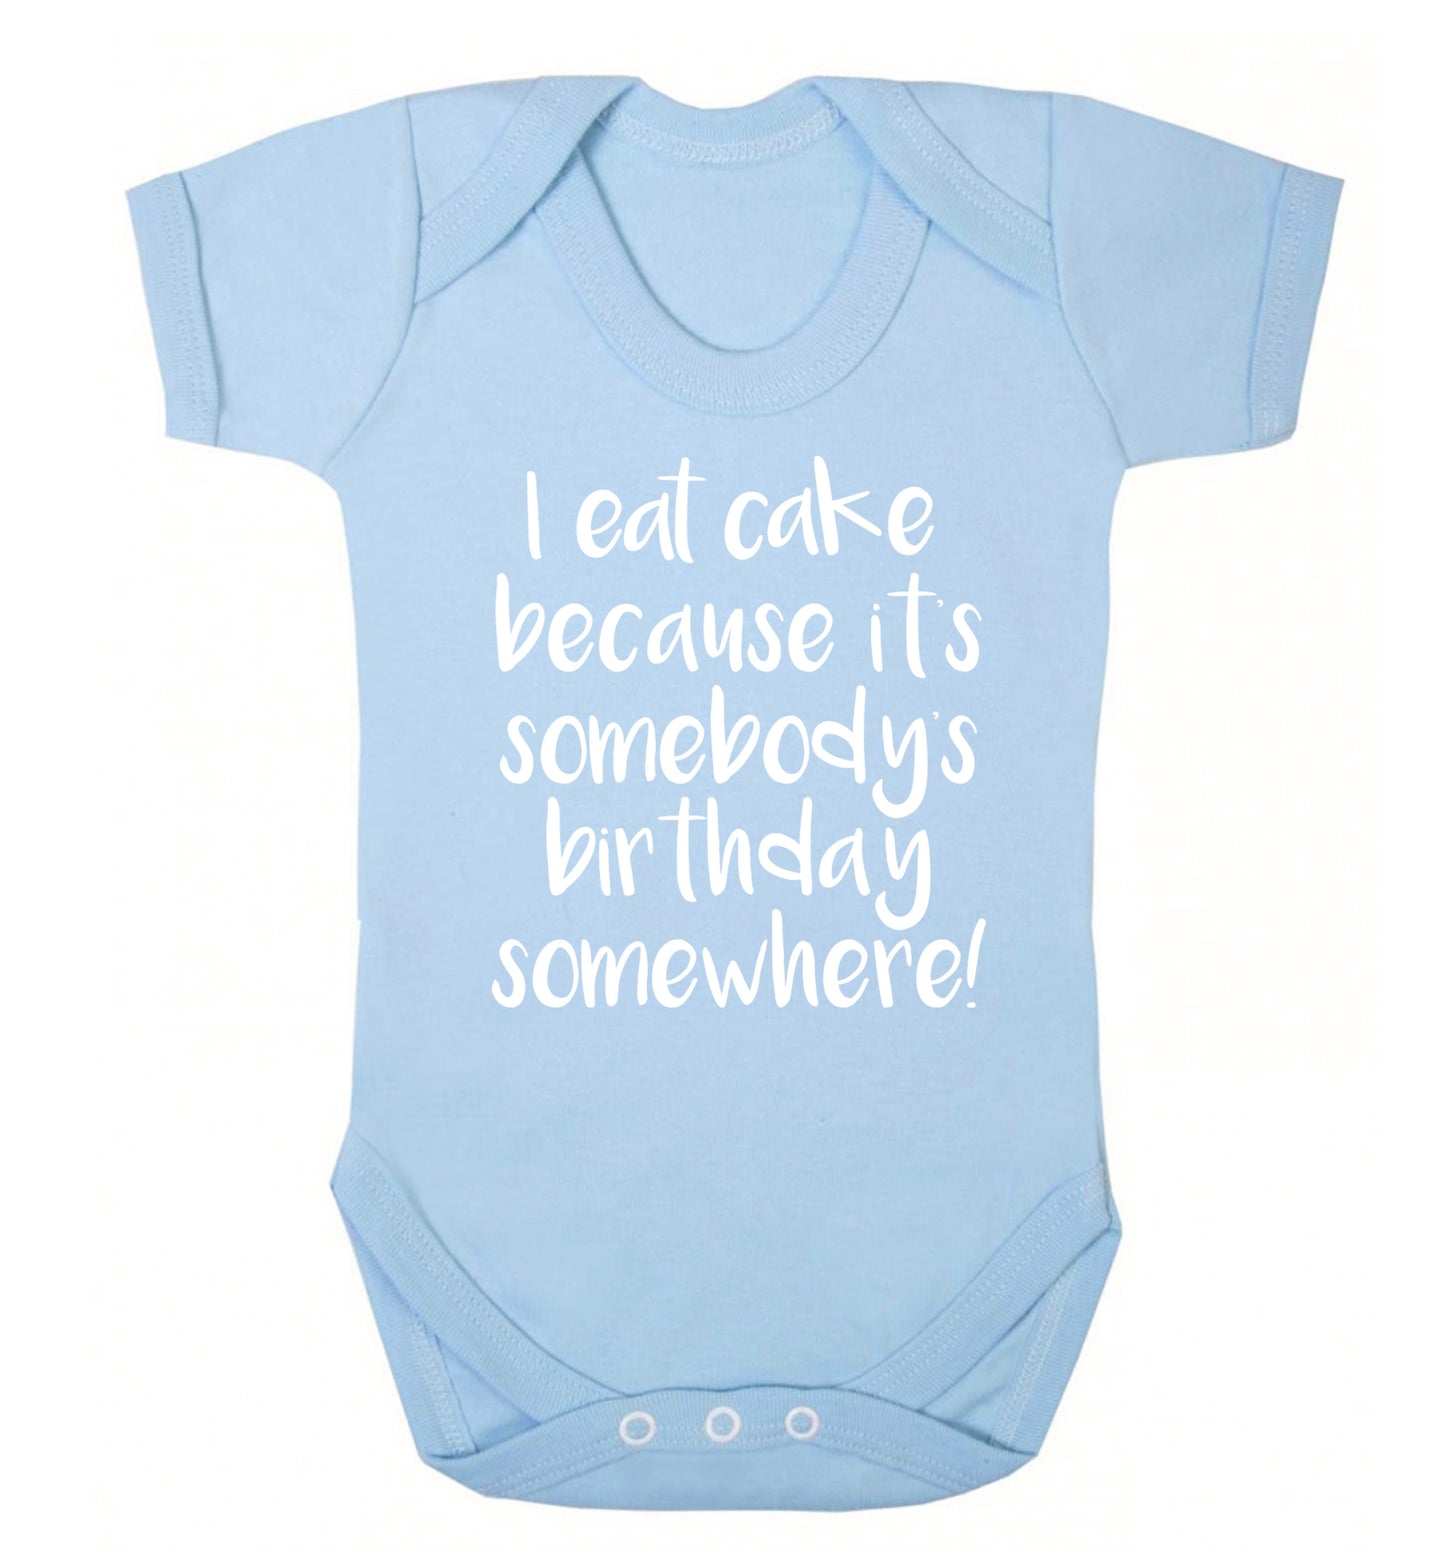 I eat cake because it's somebody's birthday somewhere! Baby Vest pale blue 18-24 months